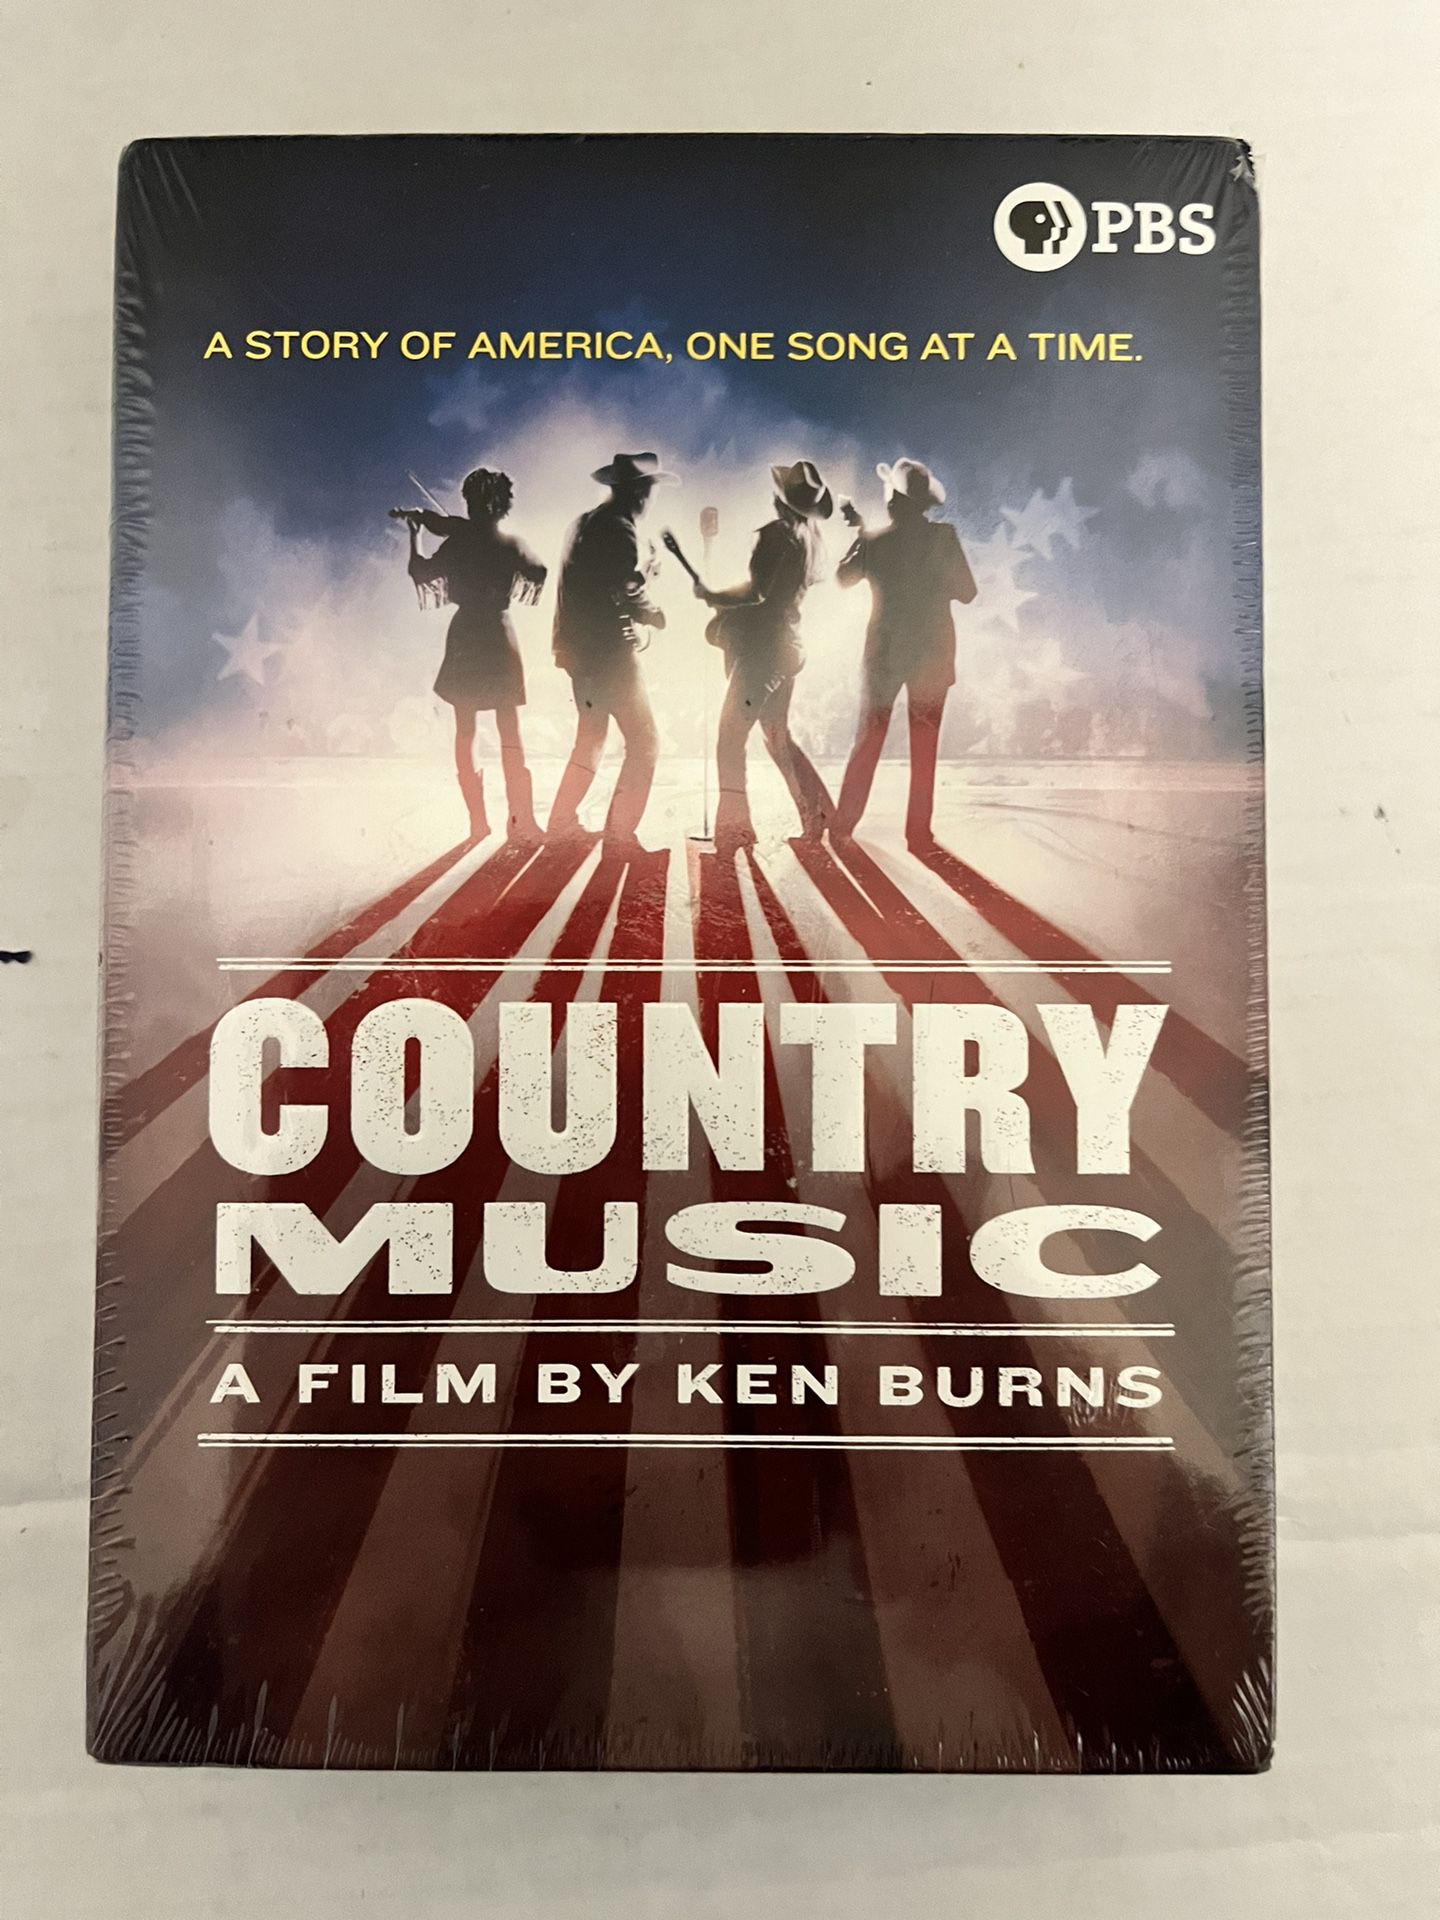 Country Music - A Film By Ken Burns - (New) - (Unopened) (8) - Discs PBS